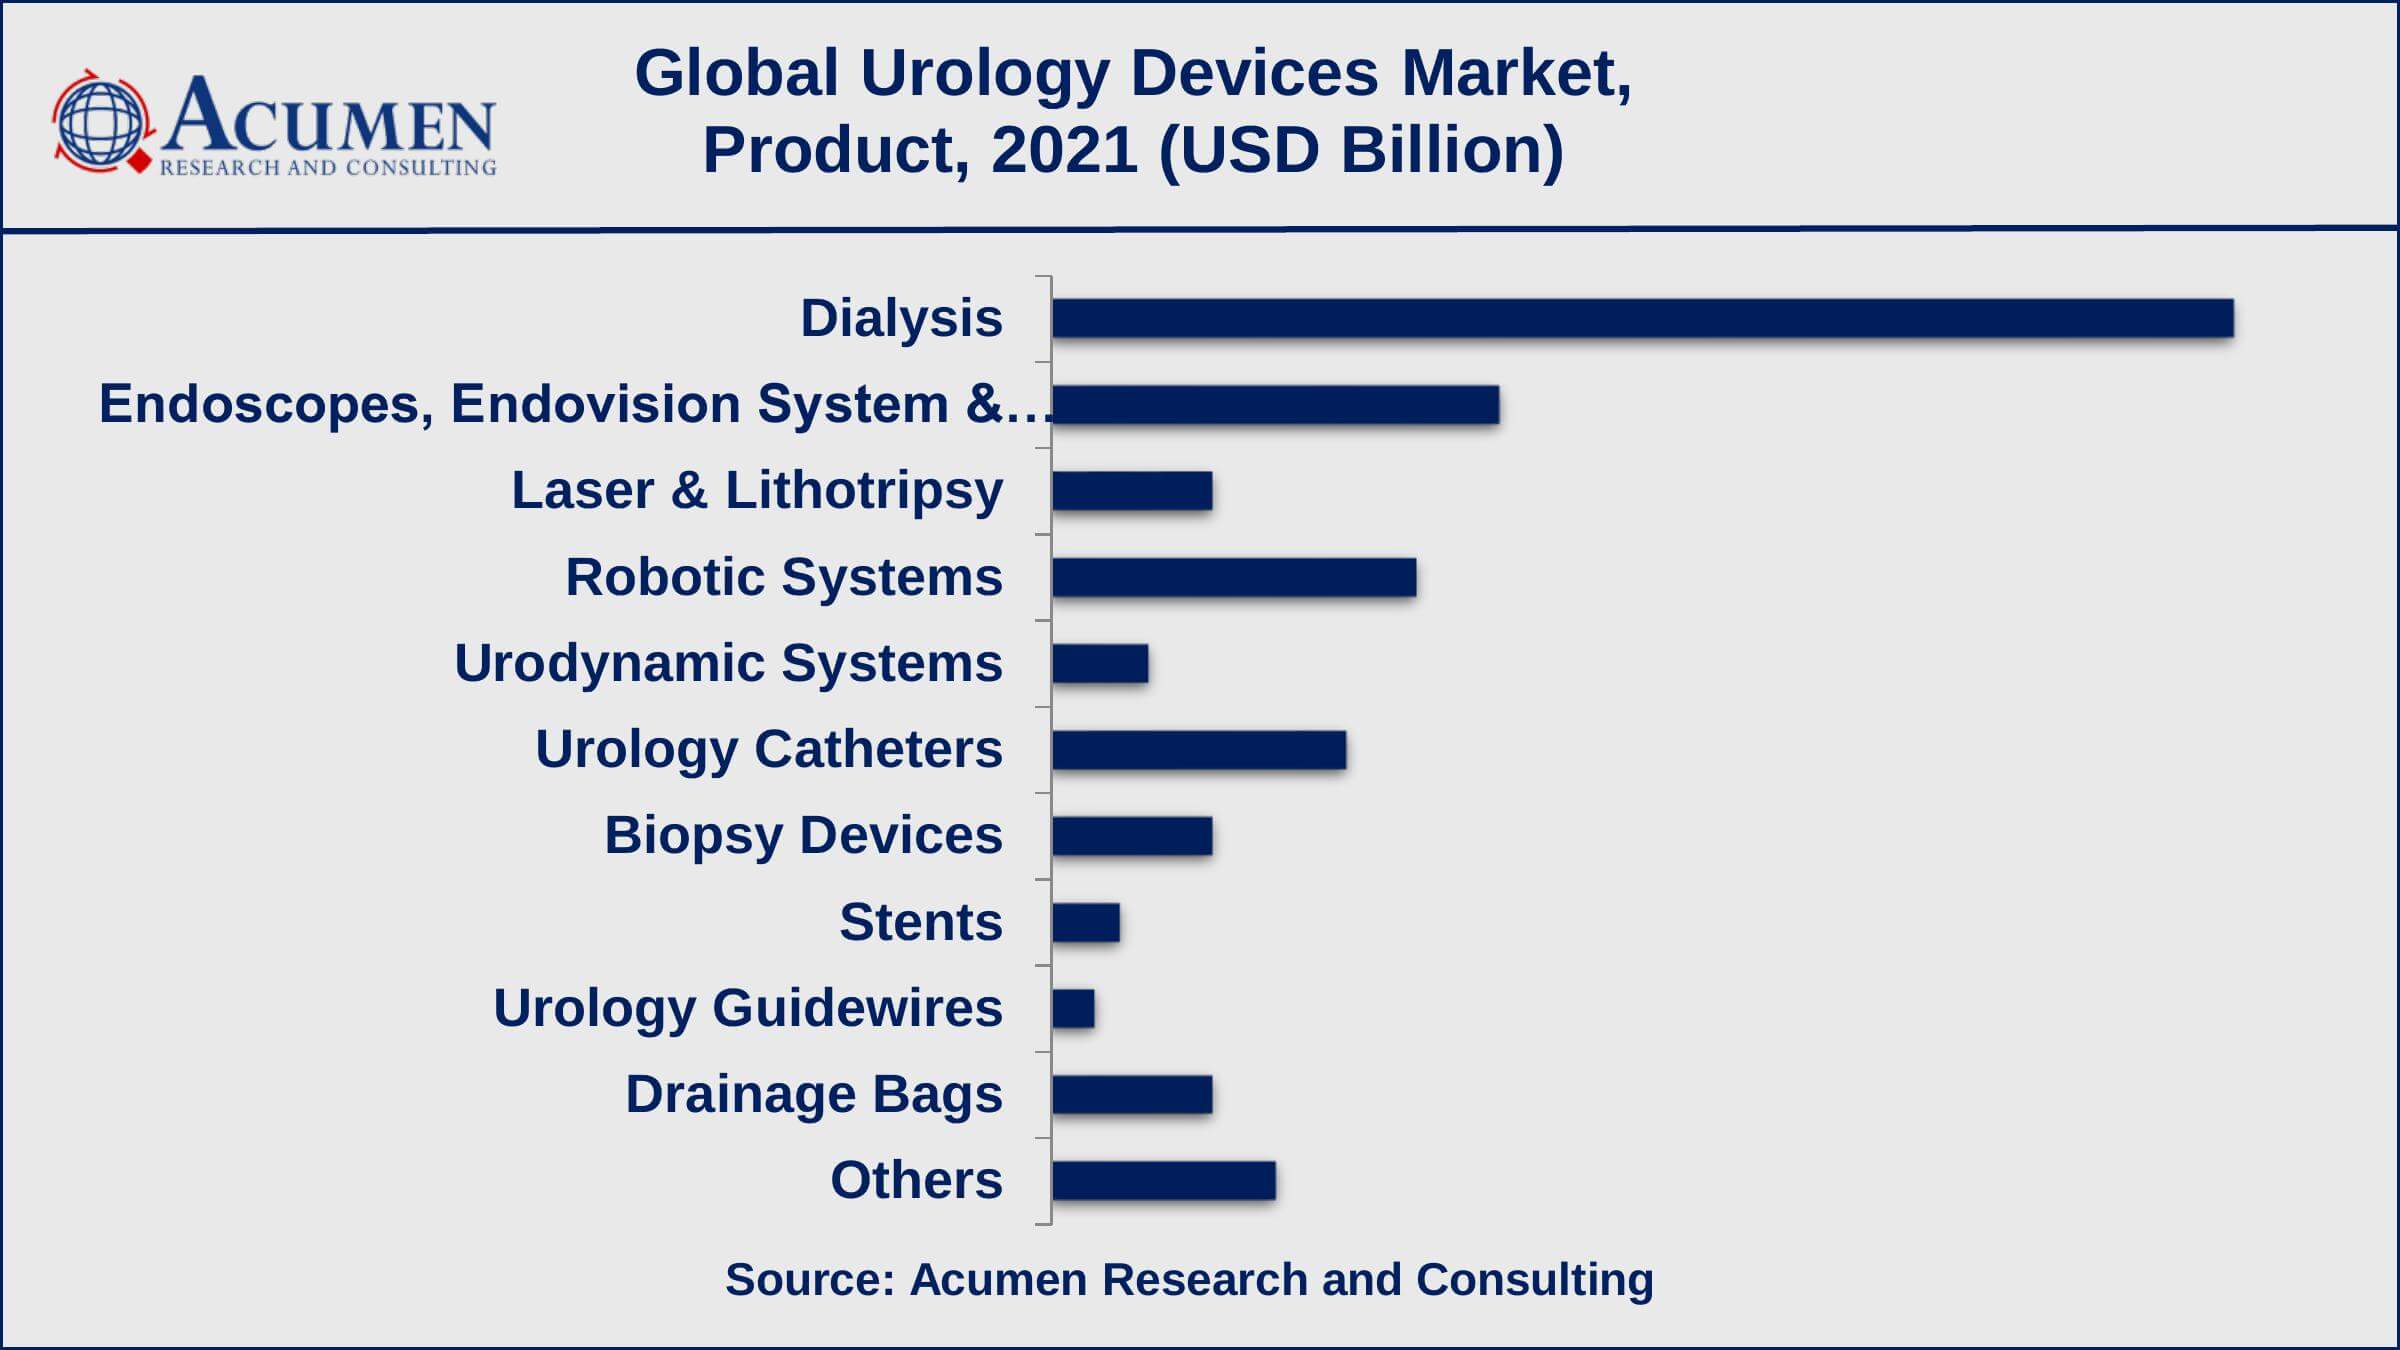 Based on product, dialysis recorded over 37% of the overall market share in 2021